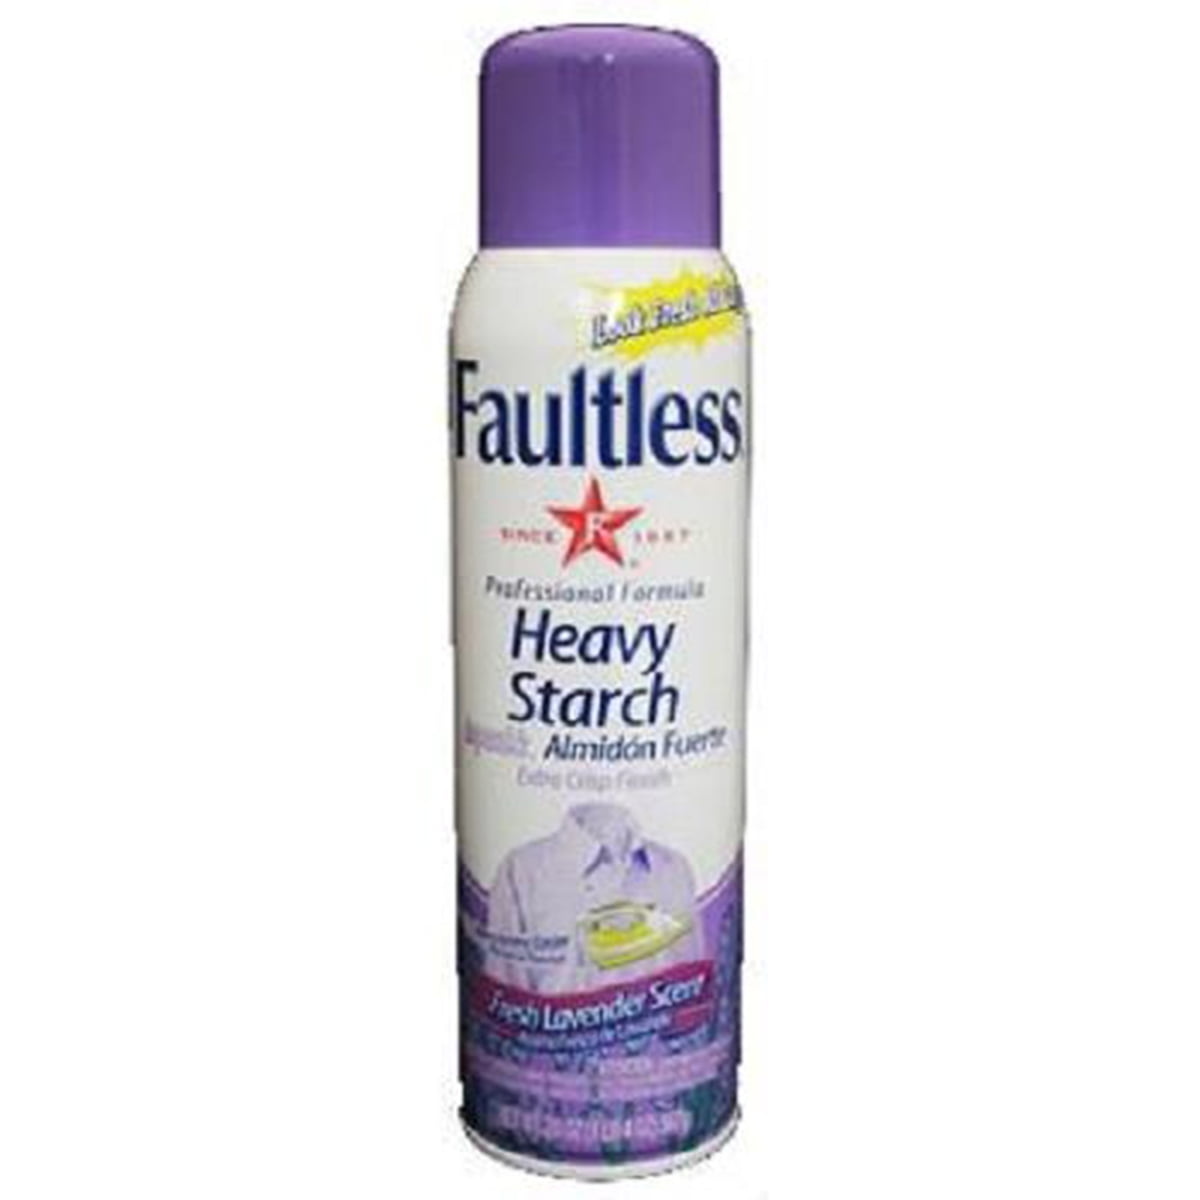 Faultless Lavender Scent Ironing Spray Starch 20 oz, Cleaning